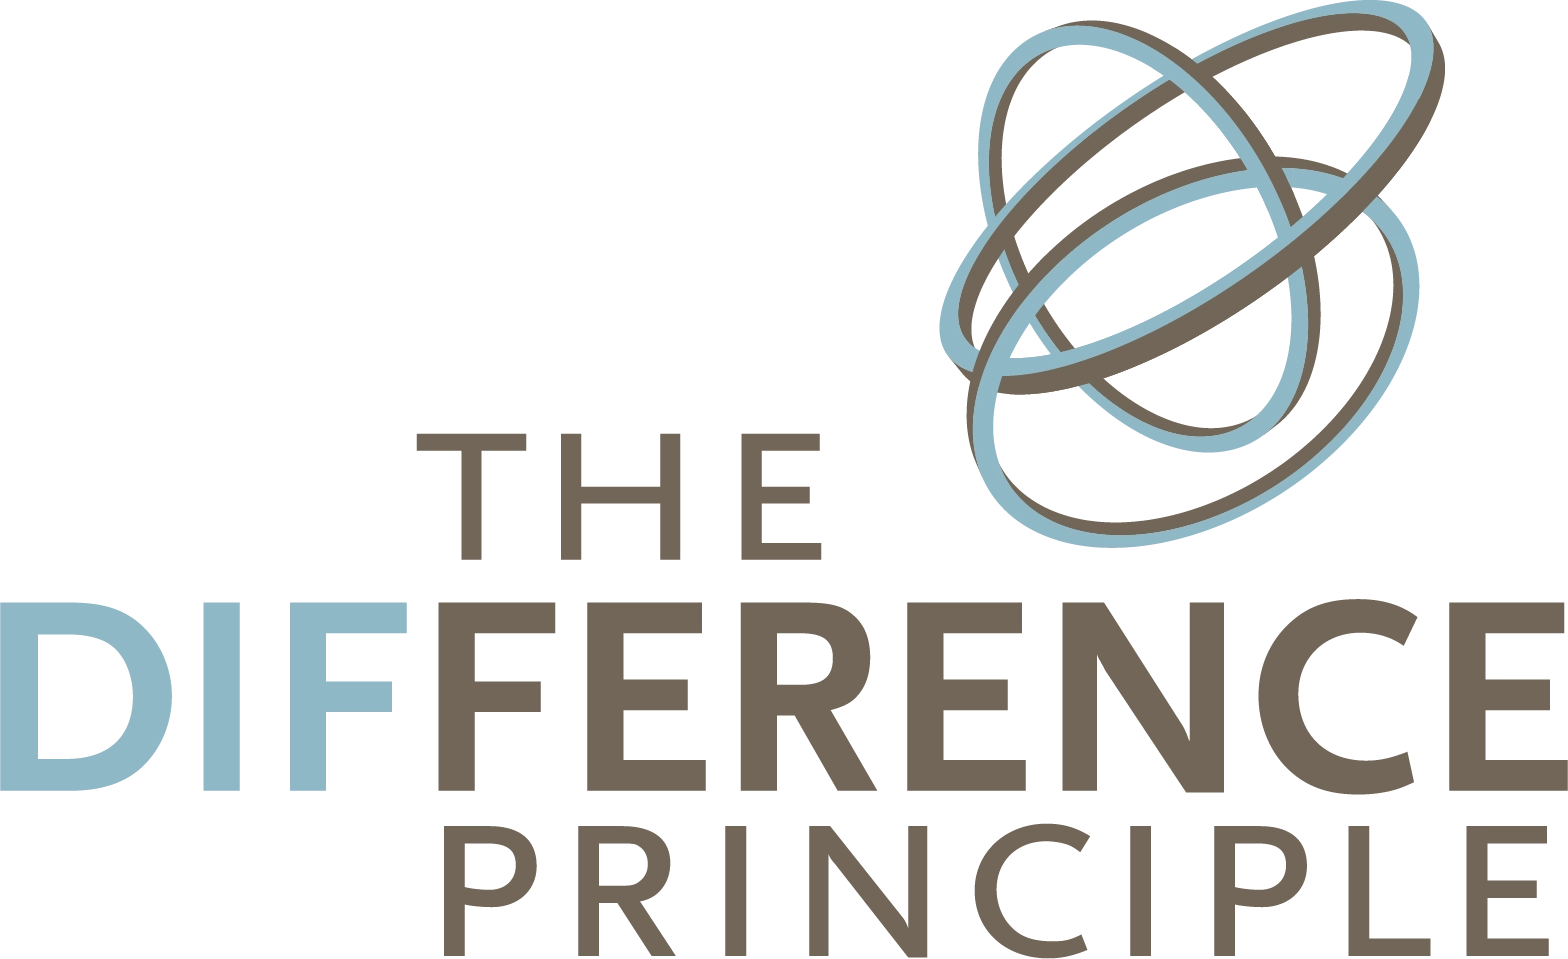 The Difference Principle Logo